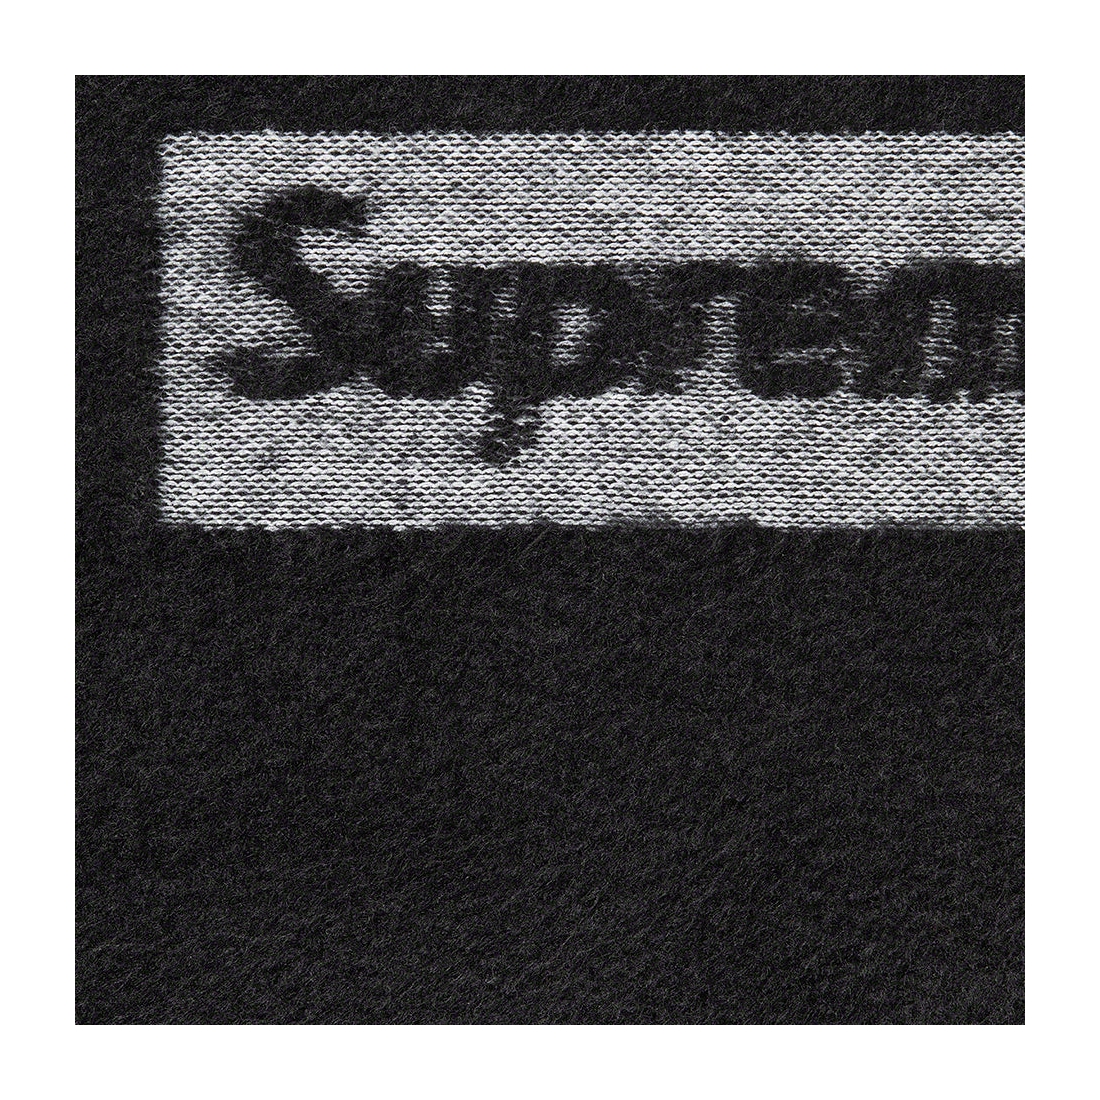 supreme inside out box logo hooded